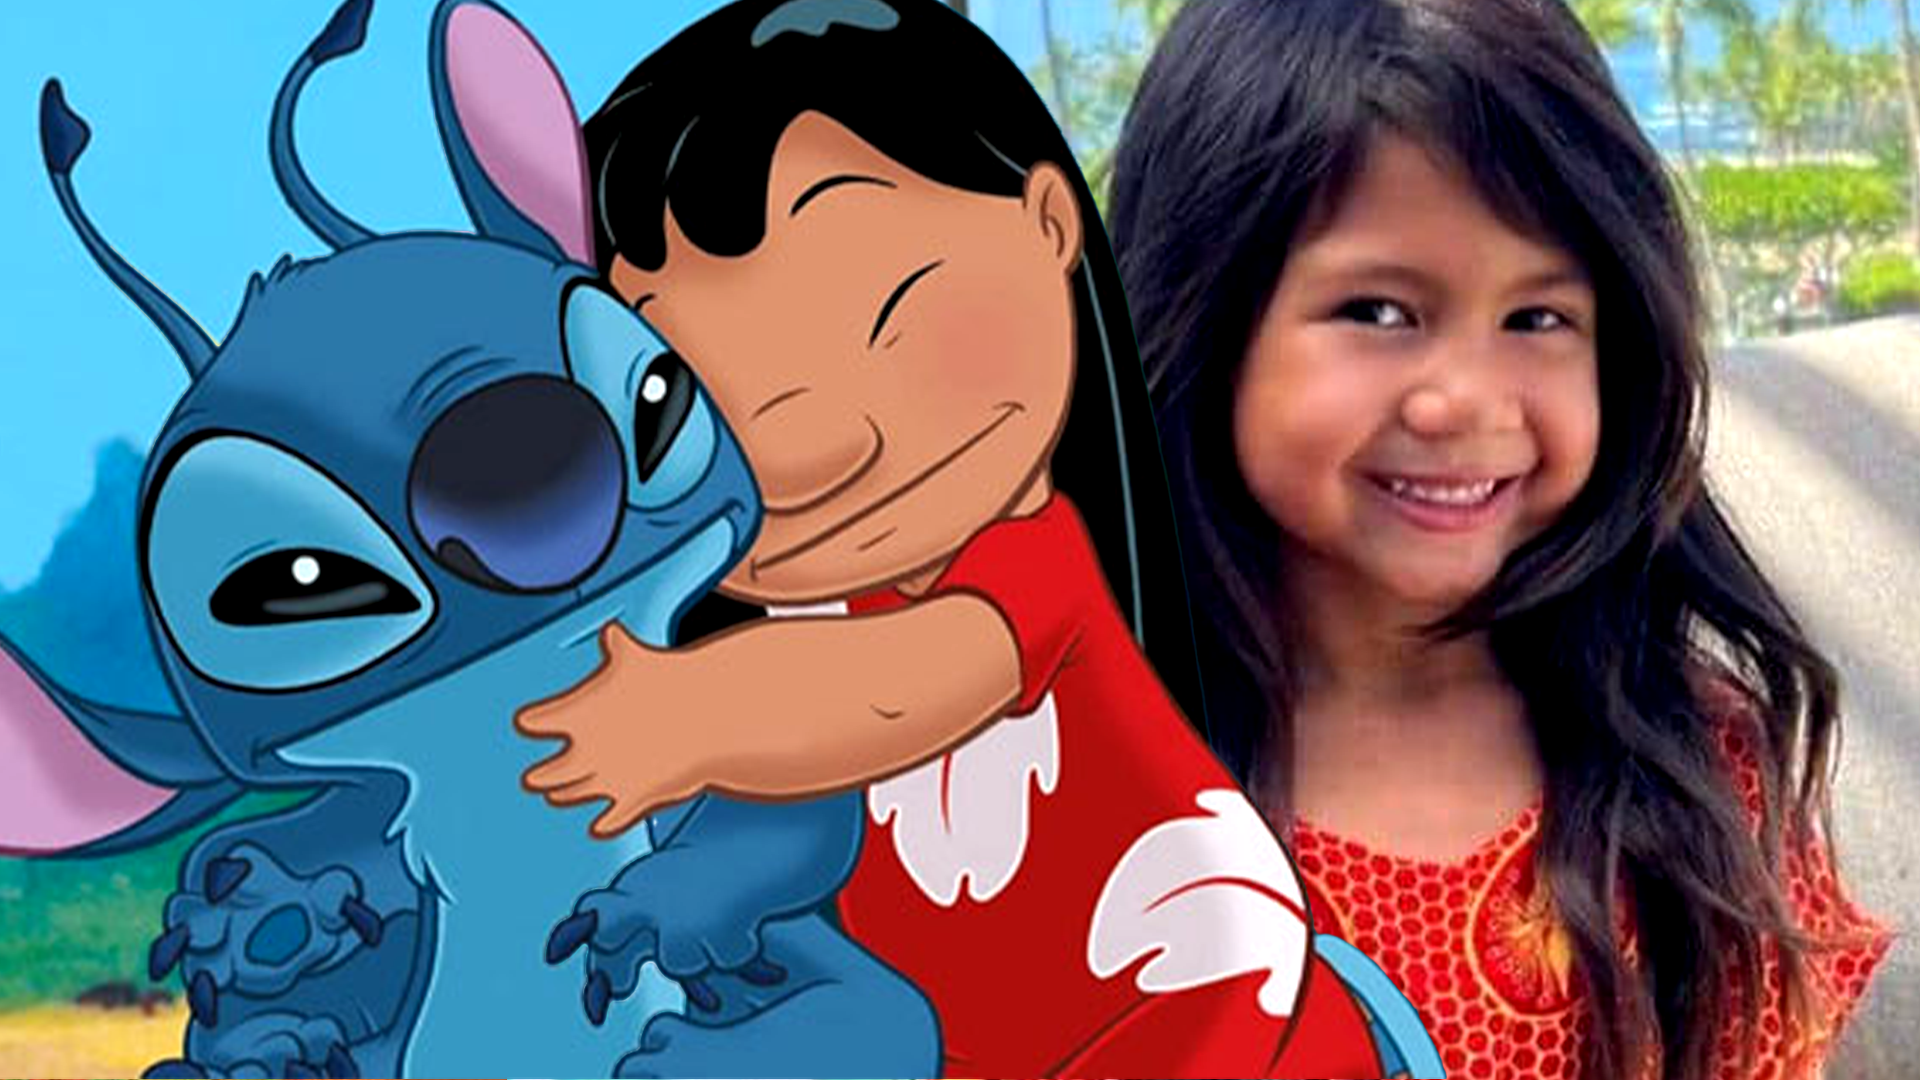 The cast of Disney's liveaction Lilo & Stitch has been revealed